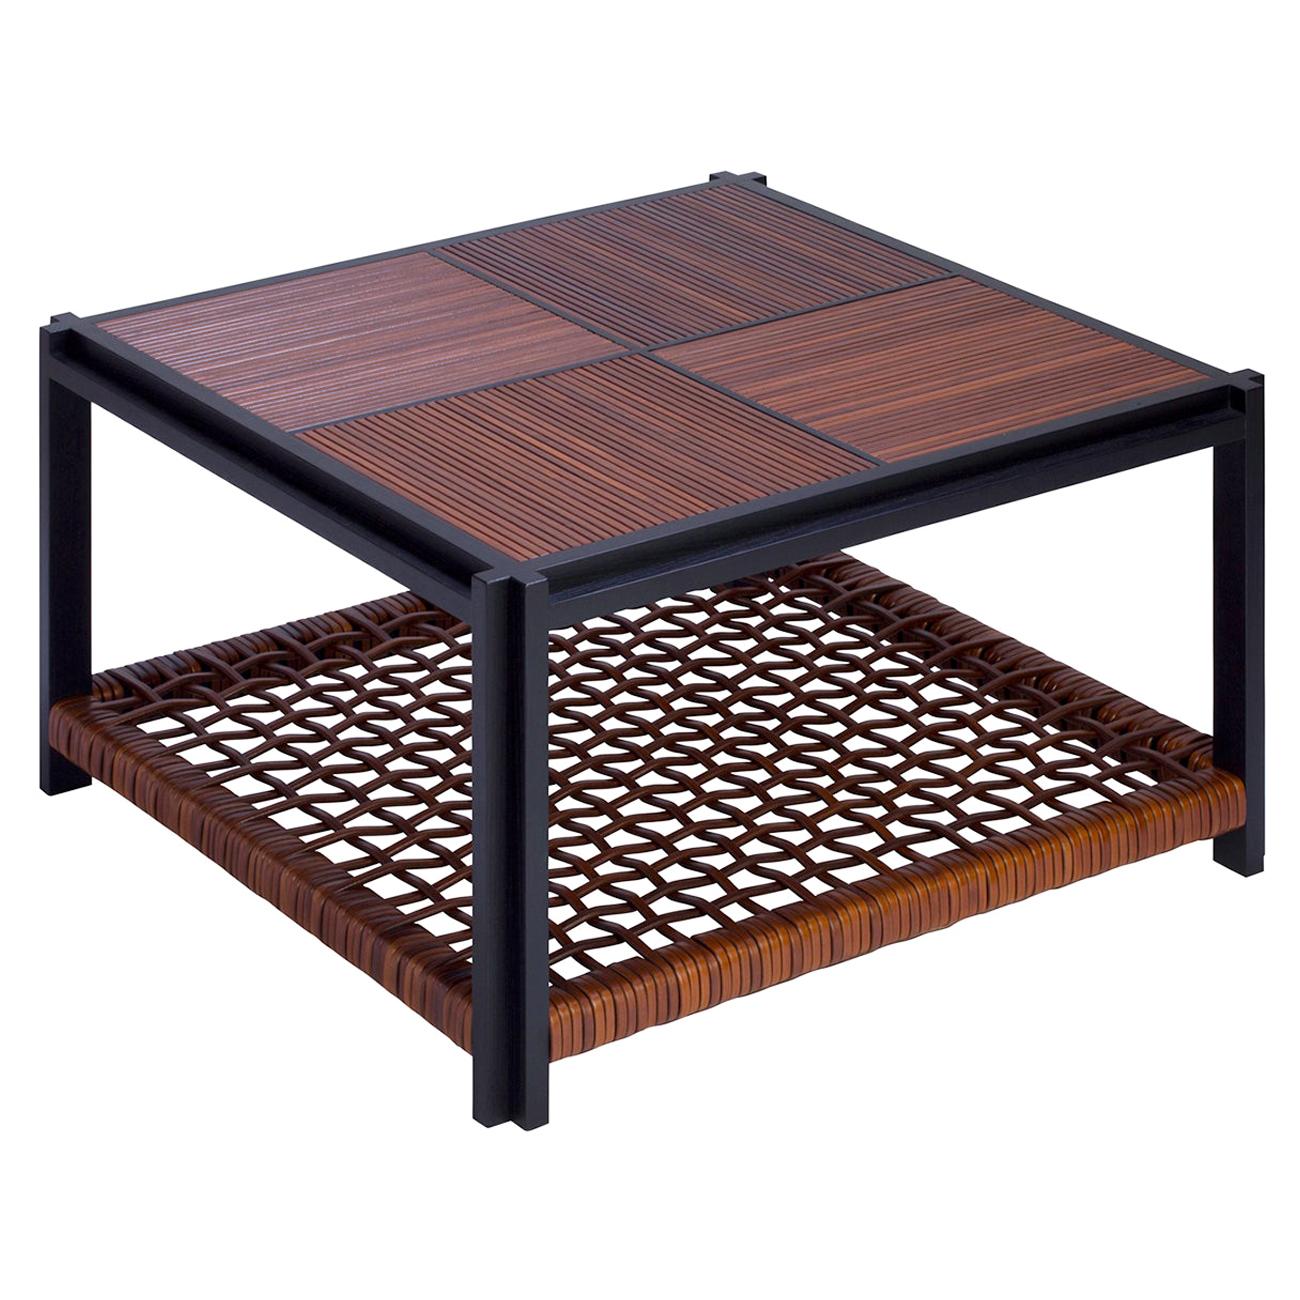 Enlaced Leather Coffee Table For Sale